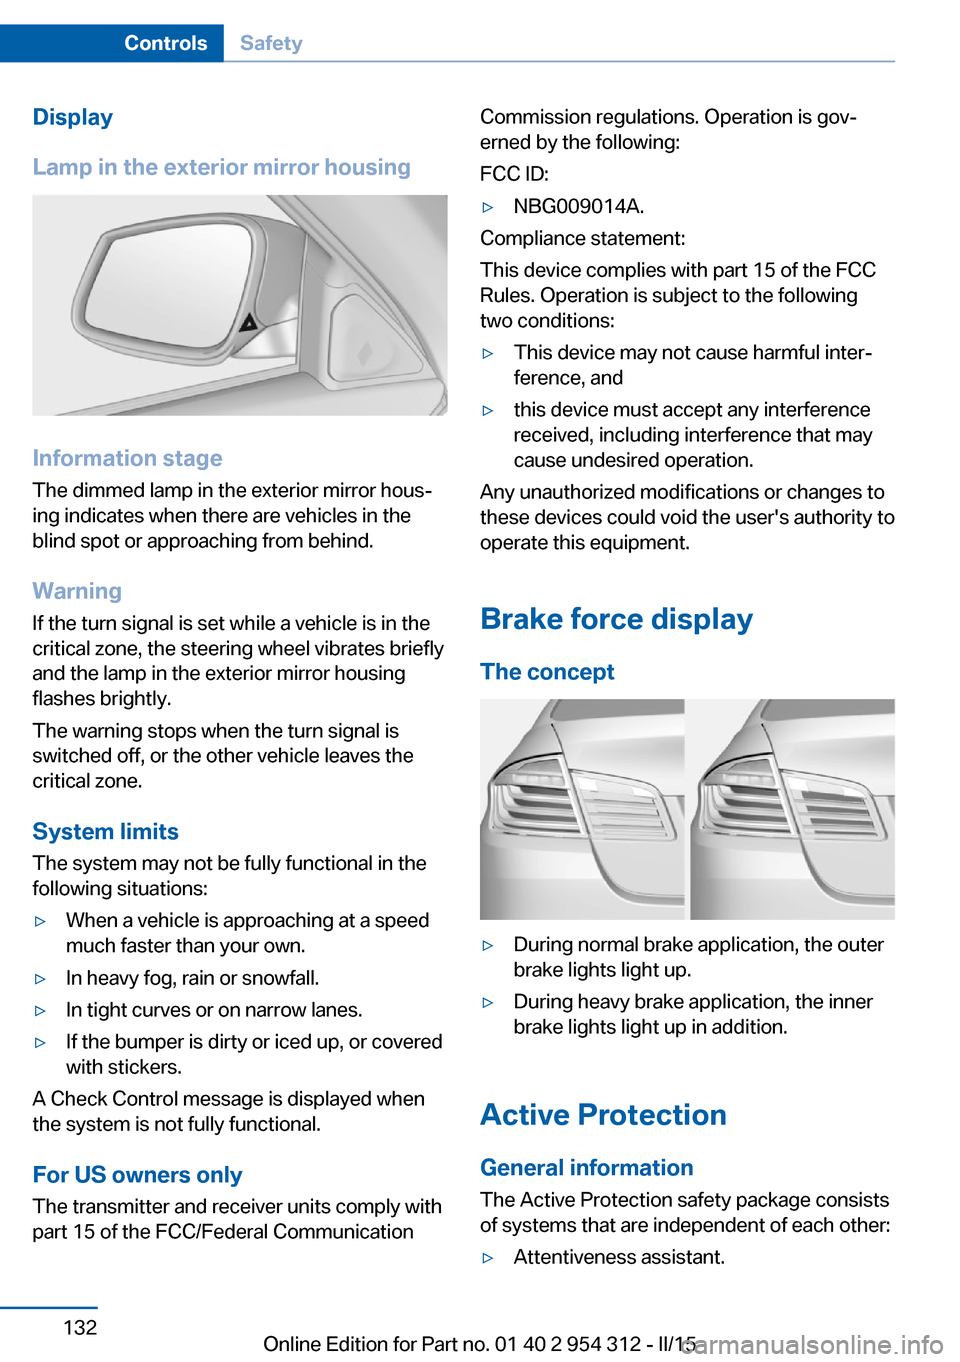 BMW 5 SERIES 2015 F10 Owners Manual Display
Lamp in the exterior mirror housing
Information stage
The dimmed lamp in the exterior mirror hous‐
ing indicates when there are vehicles in the
blind spot or approaching from behind.
Warning